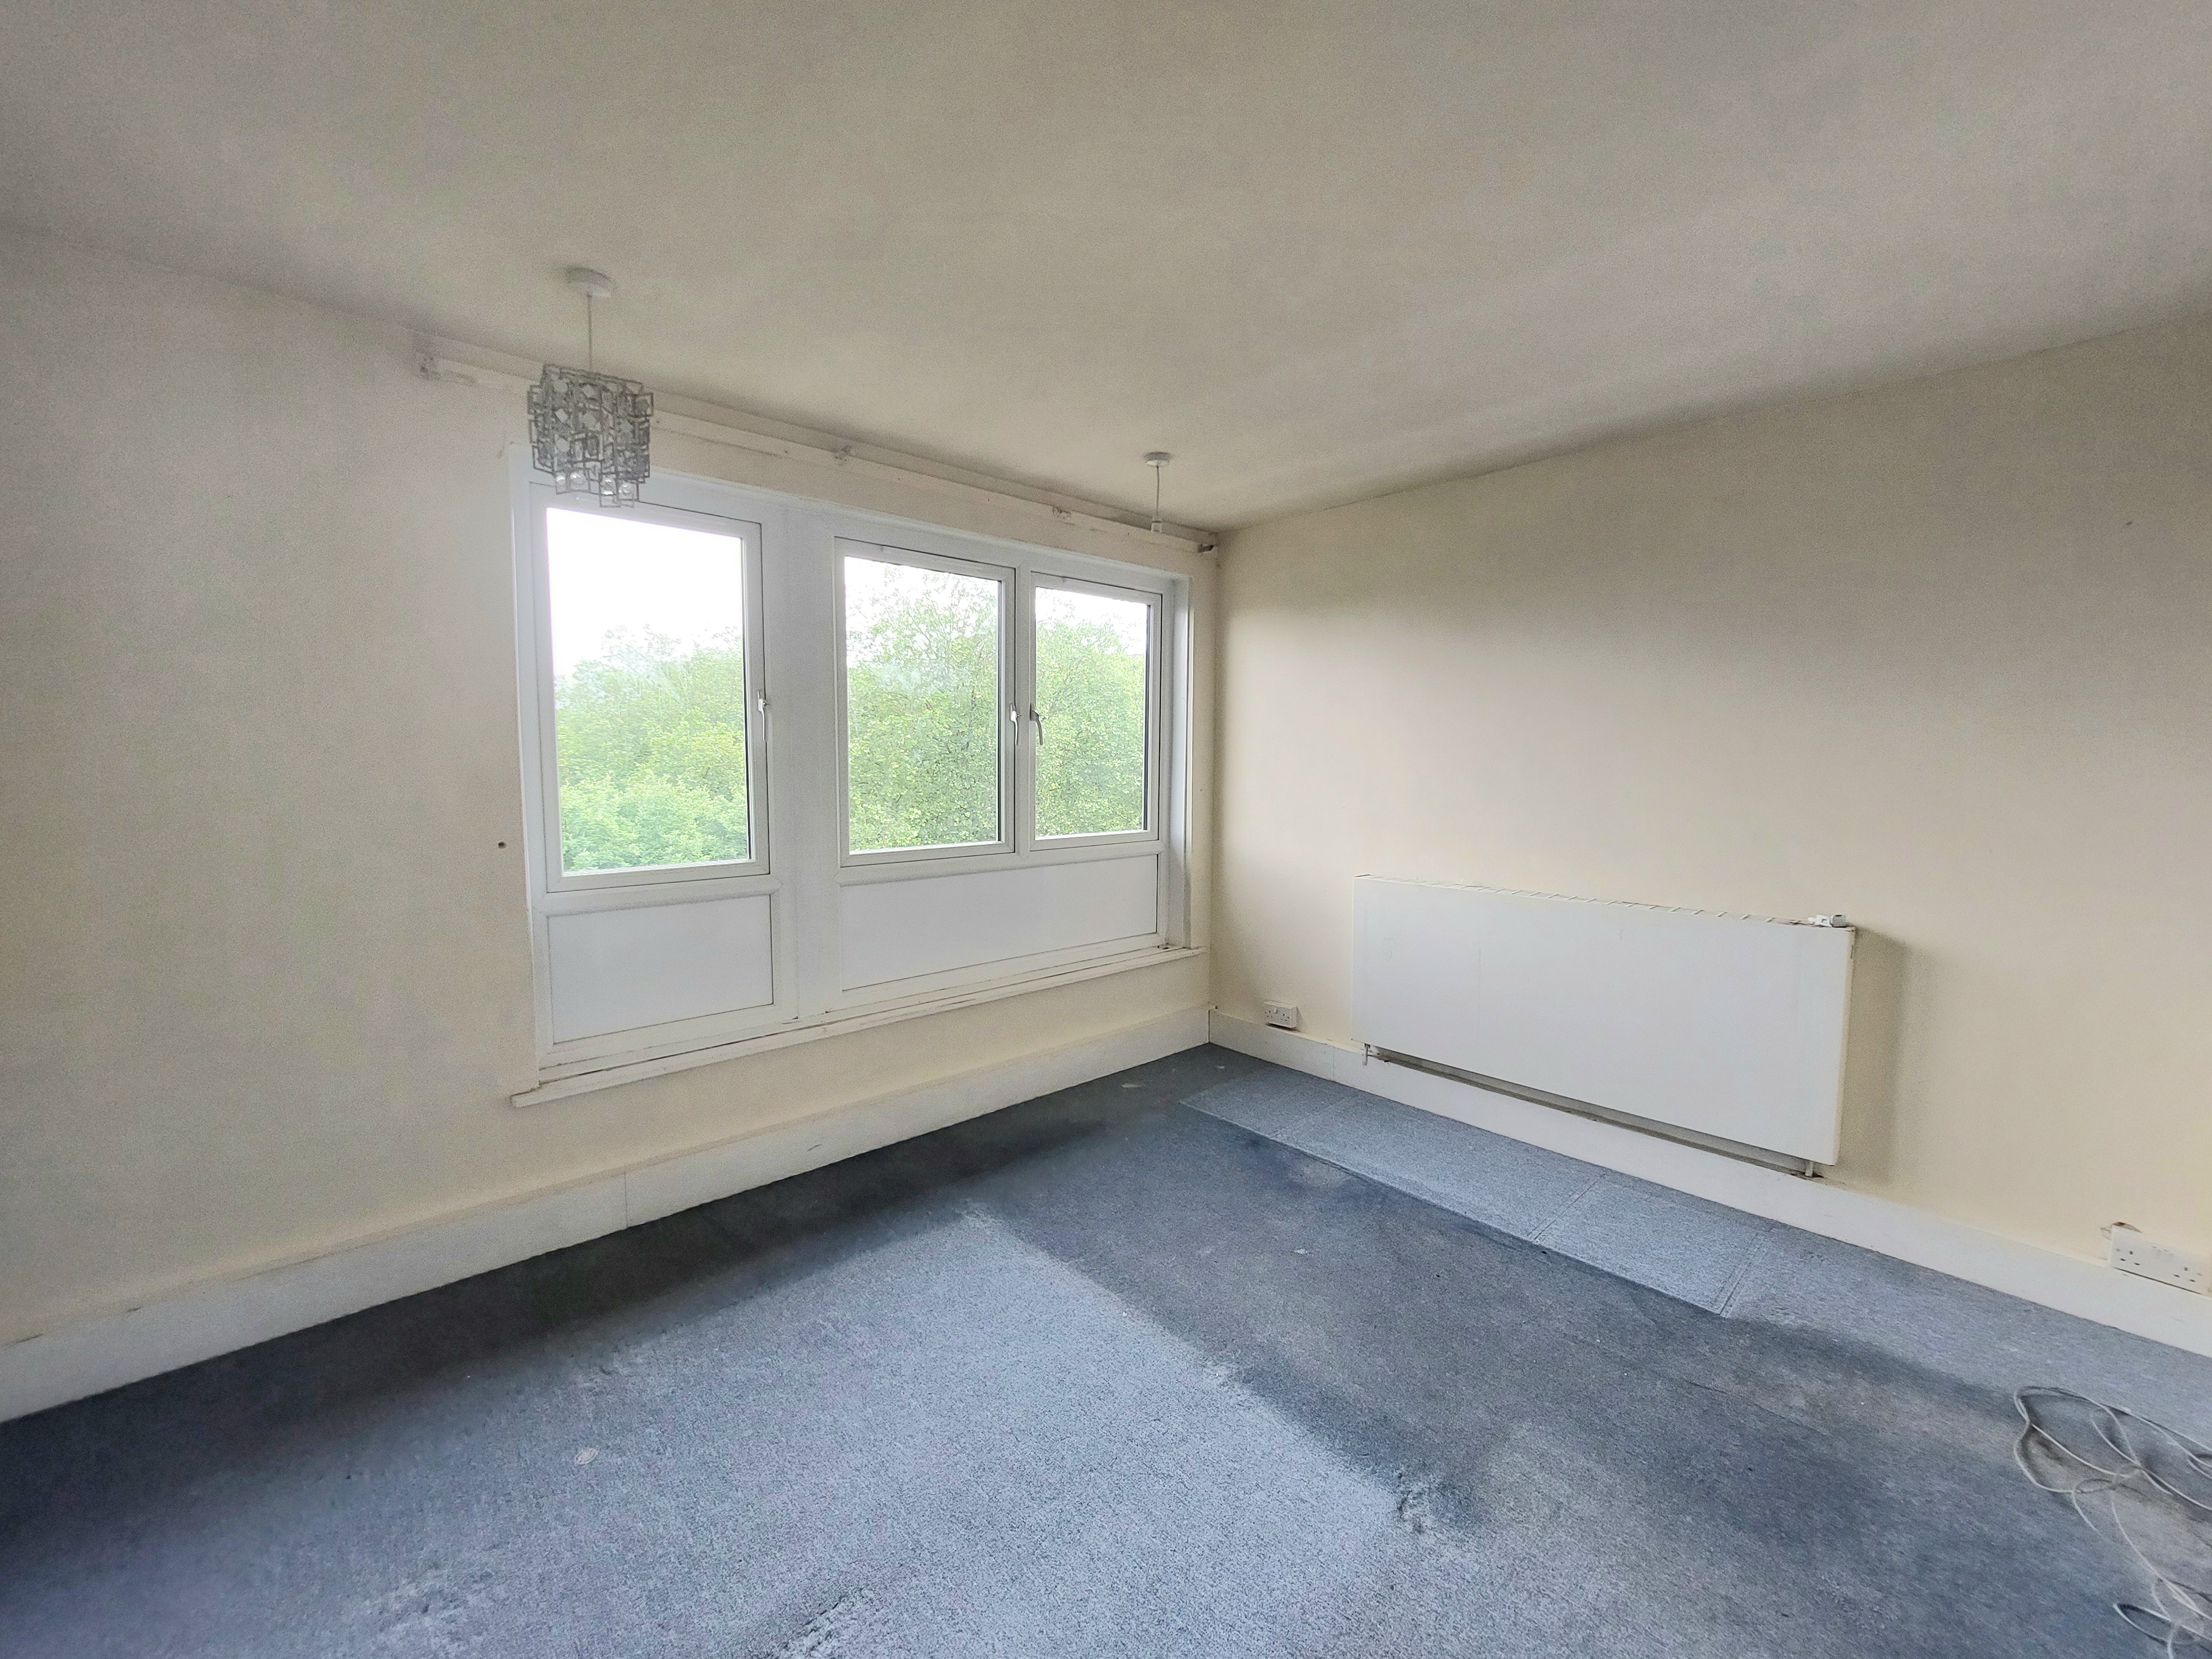 2 Bed Flat in Colindale, close to station £750PCM